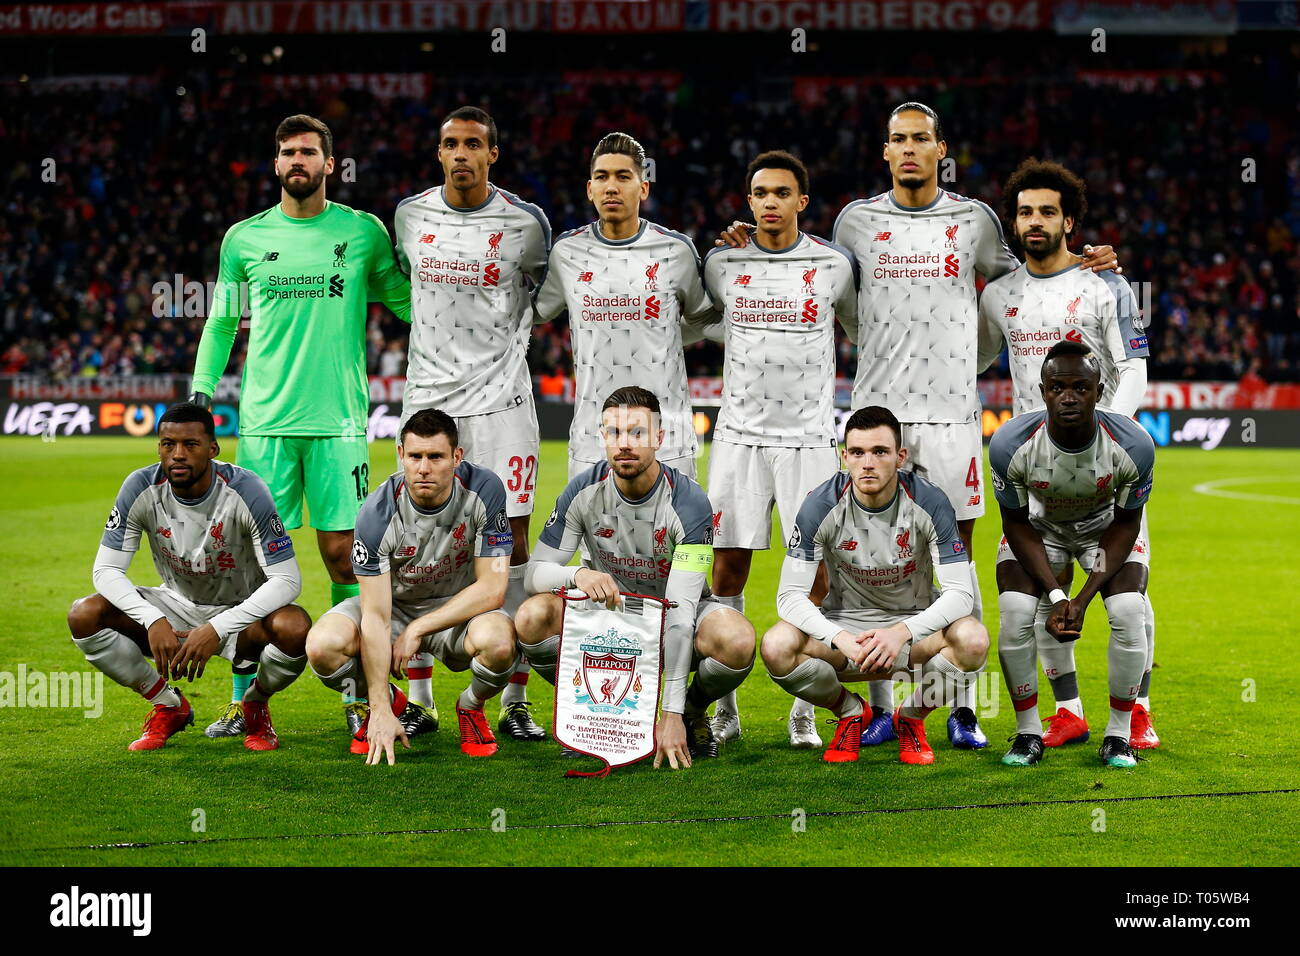 Munich, Germany. 13th Mar, 2019. Liverpool team group line-up (Liverpool)  Football/Soccer : UEFA Champions League Round of 16 2nd leg match between  FC Bayern Munchen 1-3 Liverpool FC at the Fussball Arena